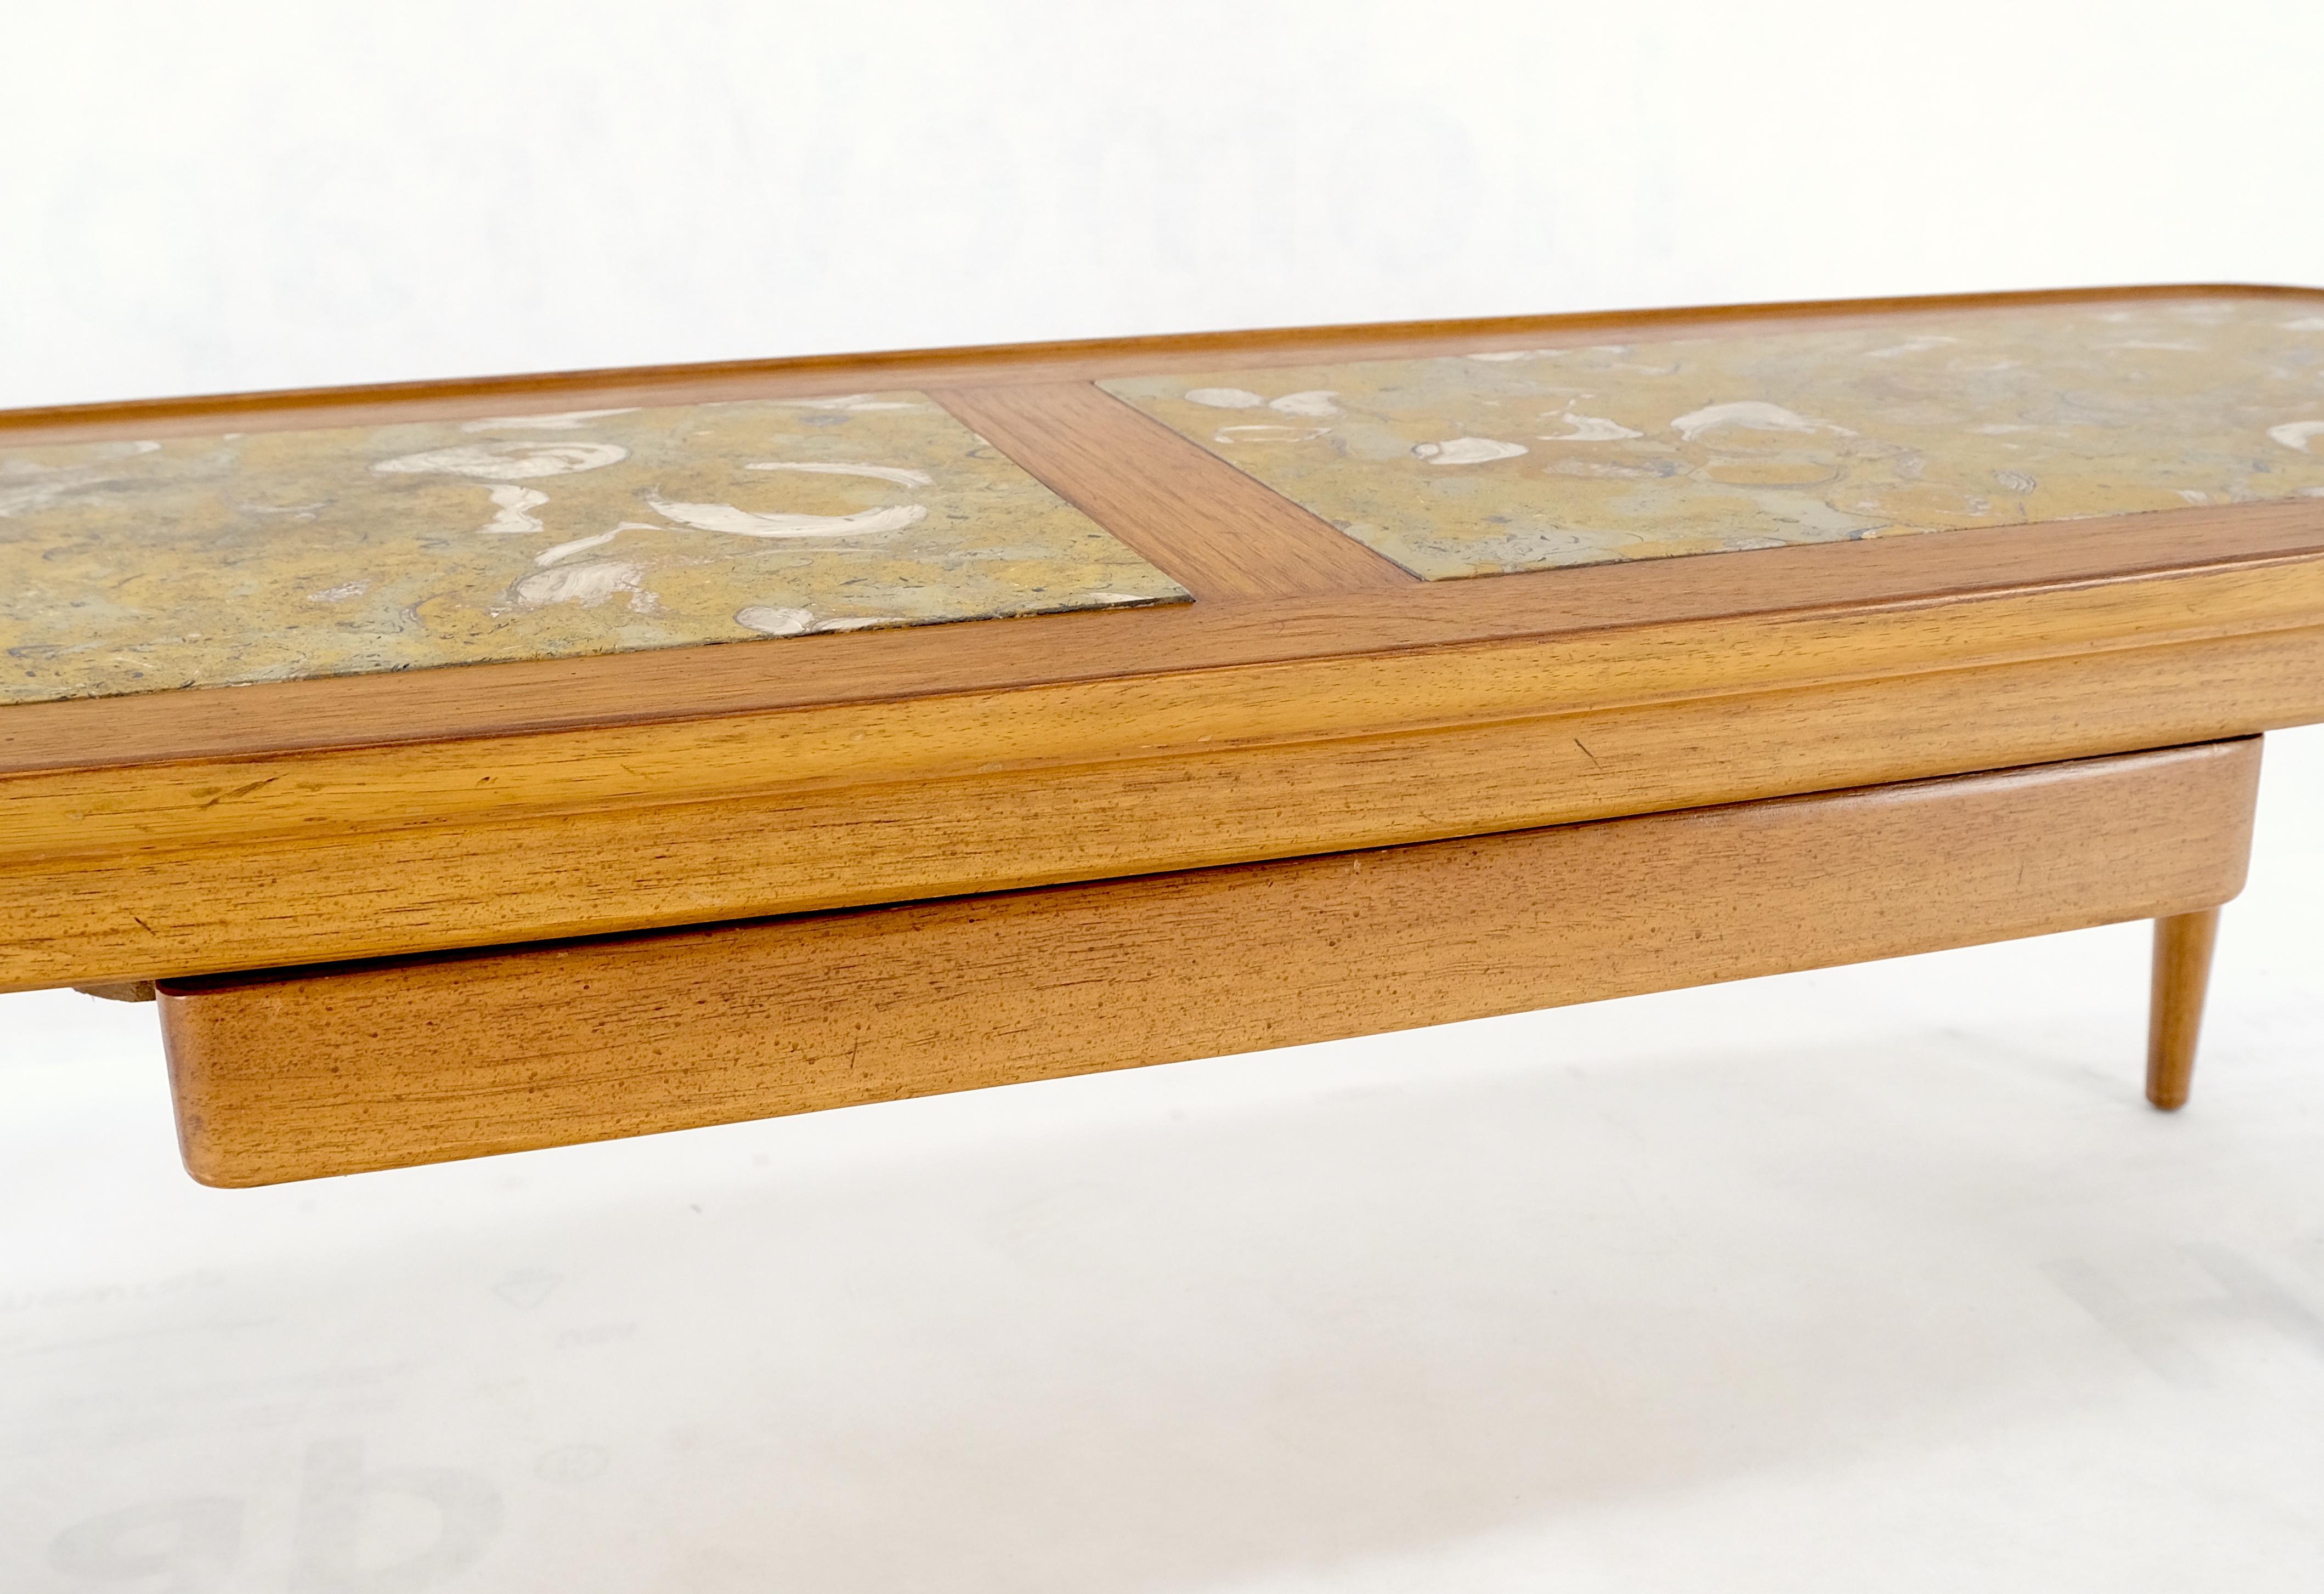 Tomlinson Fossil Marble Top Rolled Edges Rounded Corners Rectangle Surf Boat One Drawer Coffee Table MINT!